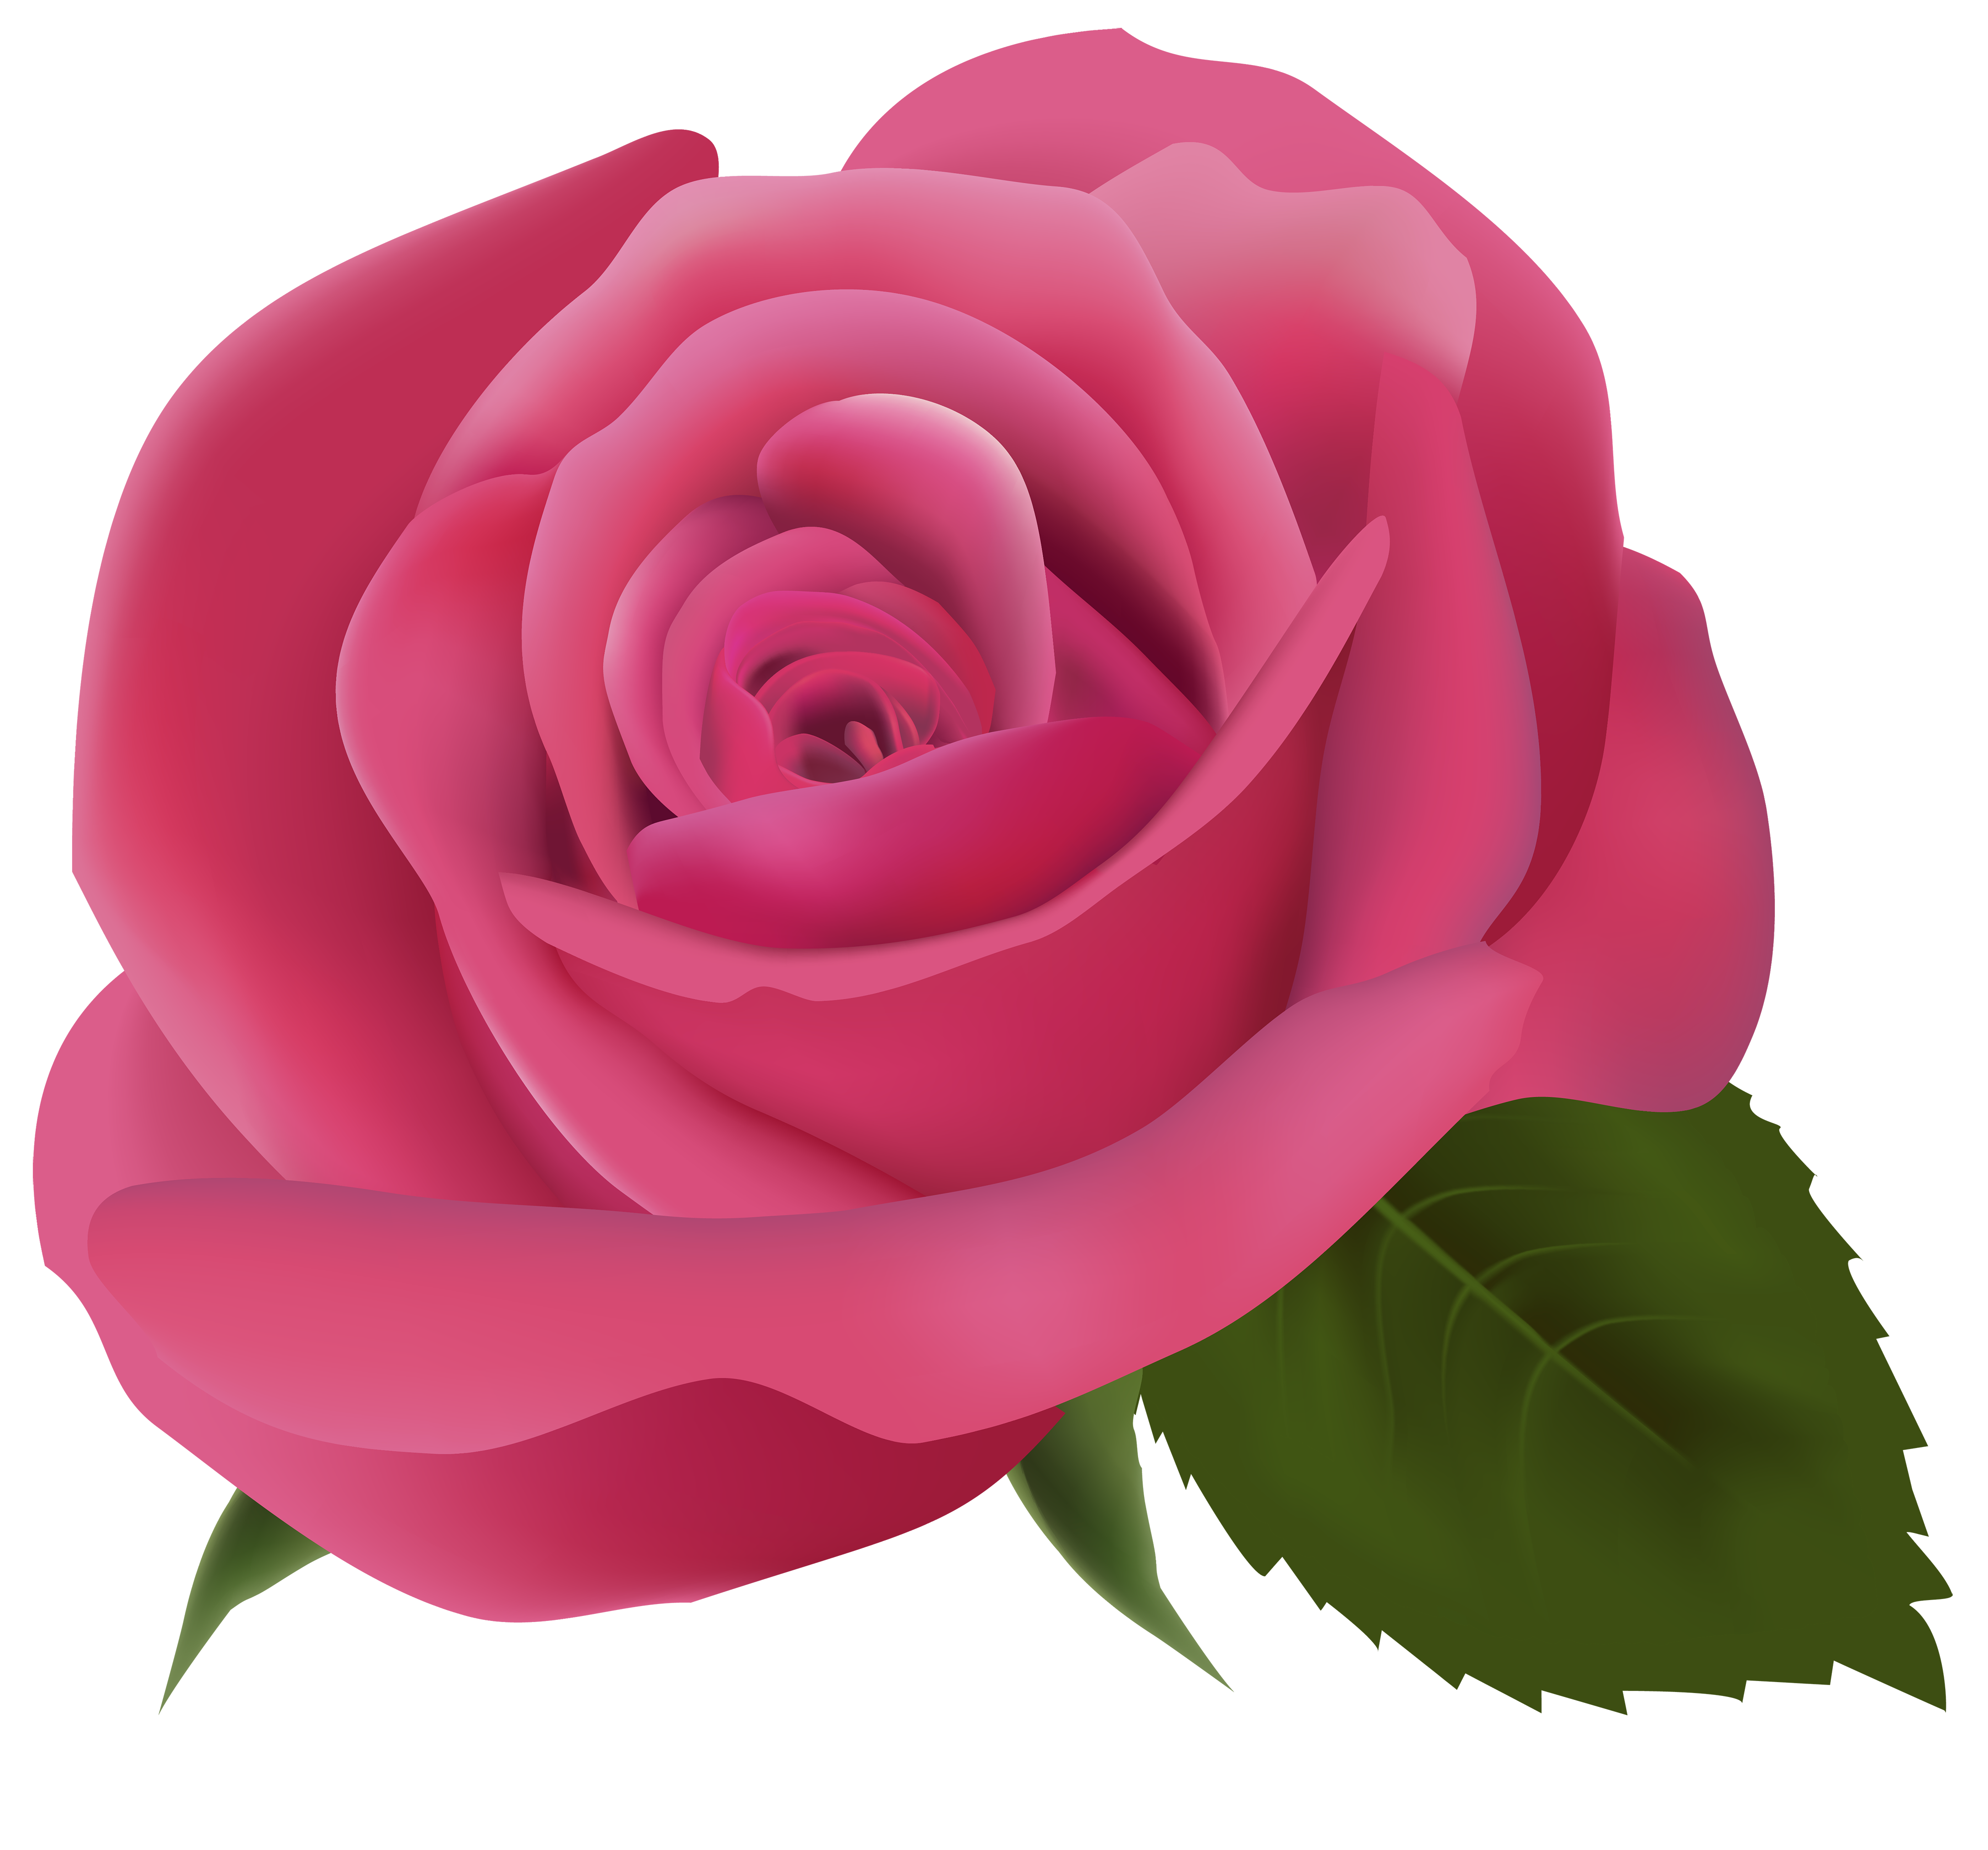 pink roses bouquet png